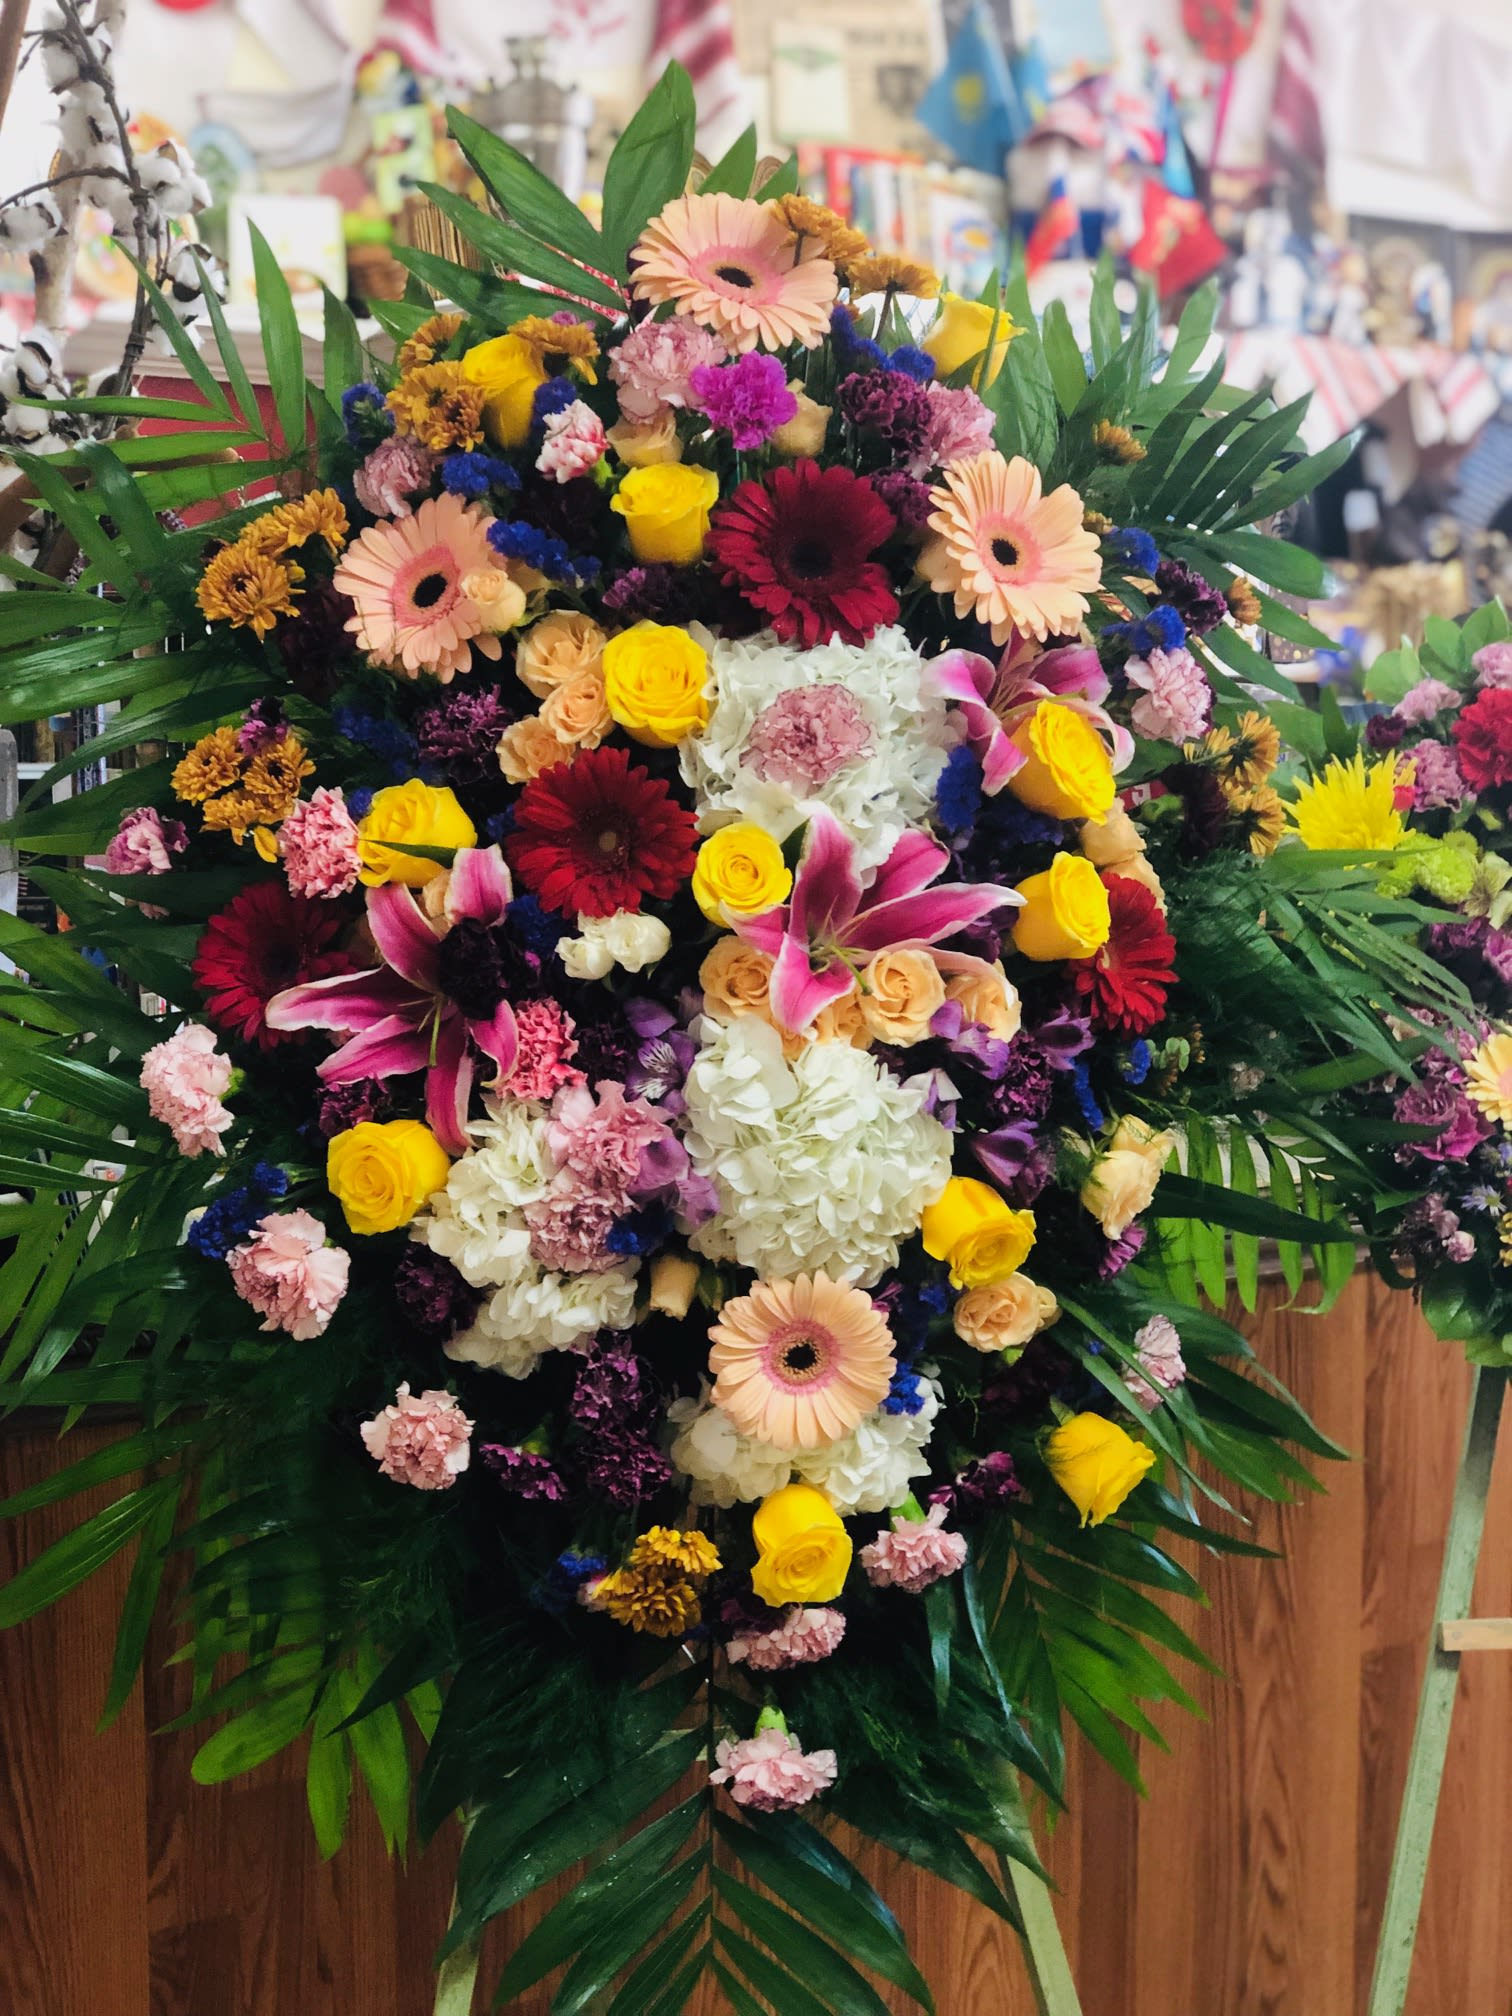 Light and Bright - This bright colorful spray is beautiful and just right for an elegant expression of heartfelt sorrow and loss. Snow white hydrangeas, assorted roses, gerbera daisies, lilies and carnations. Full of light and love. 